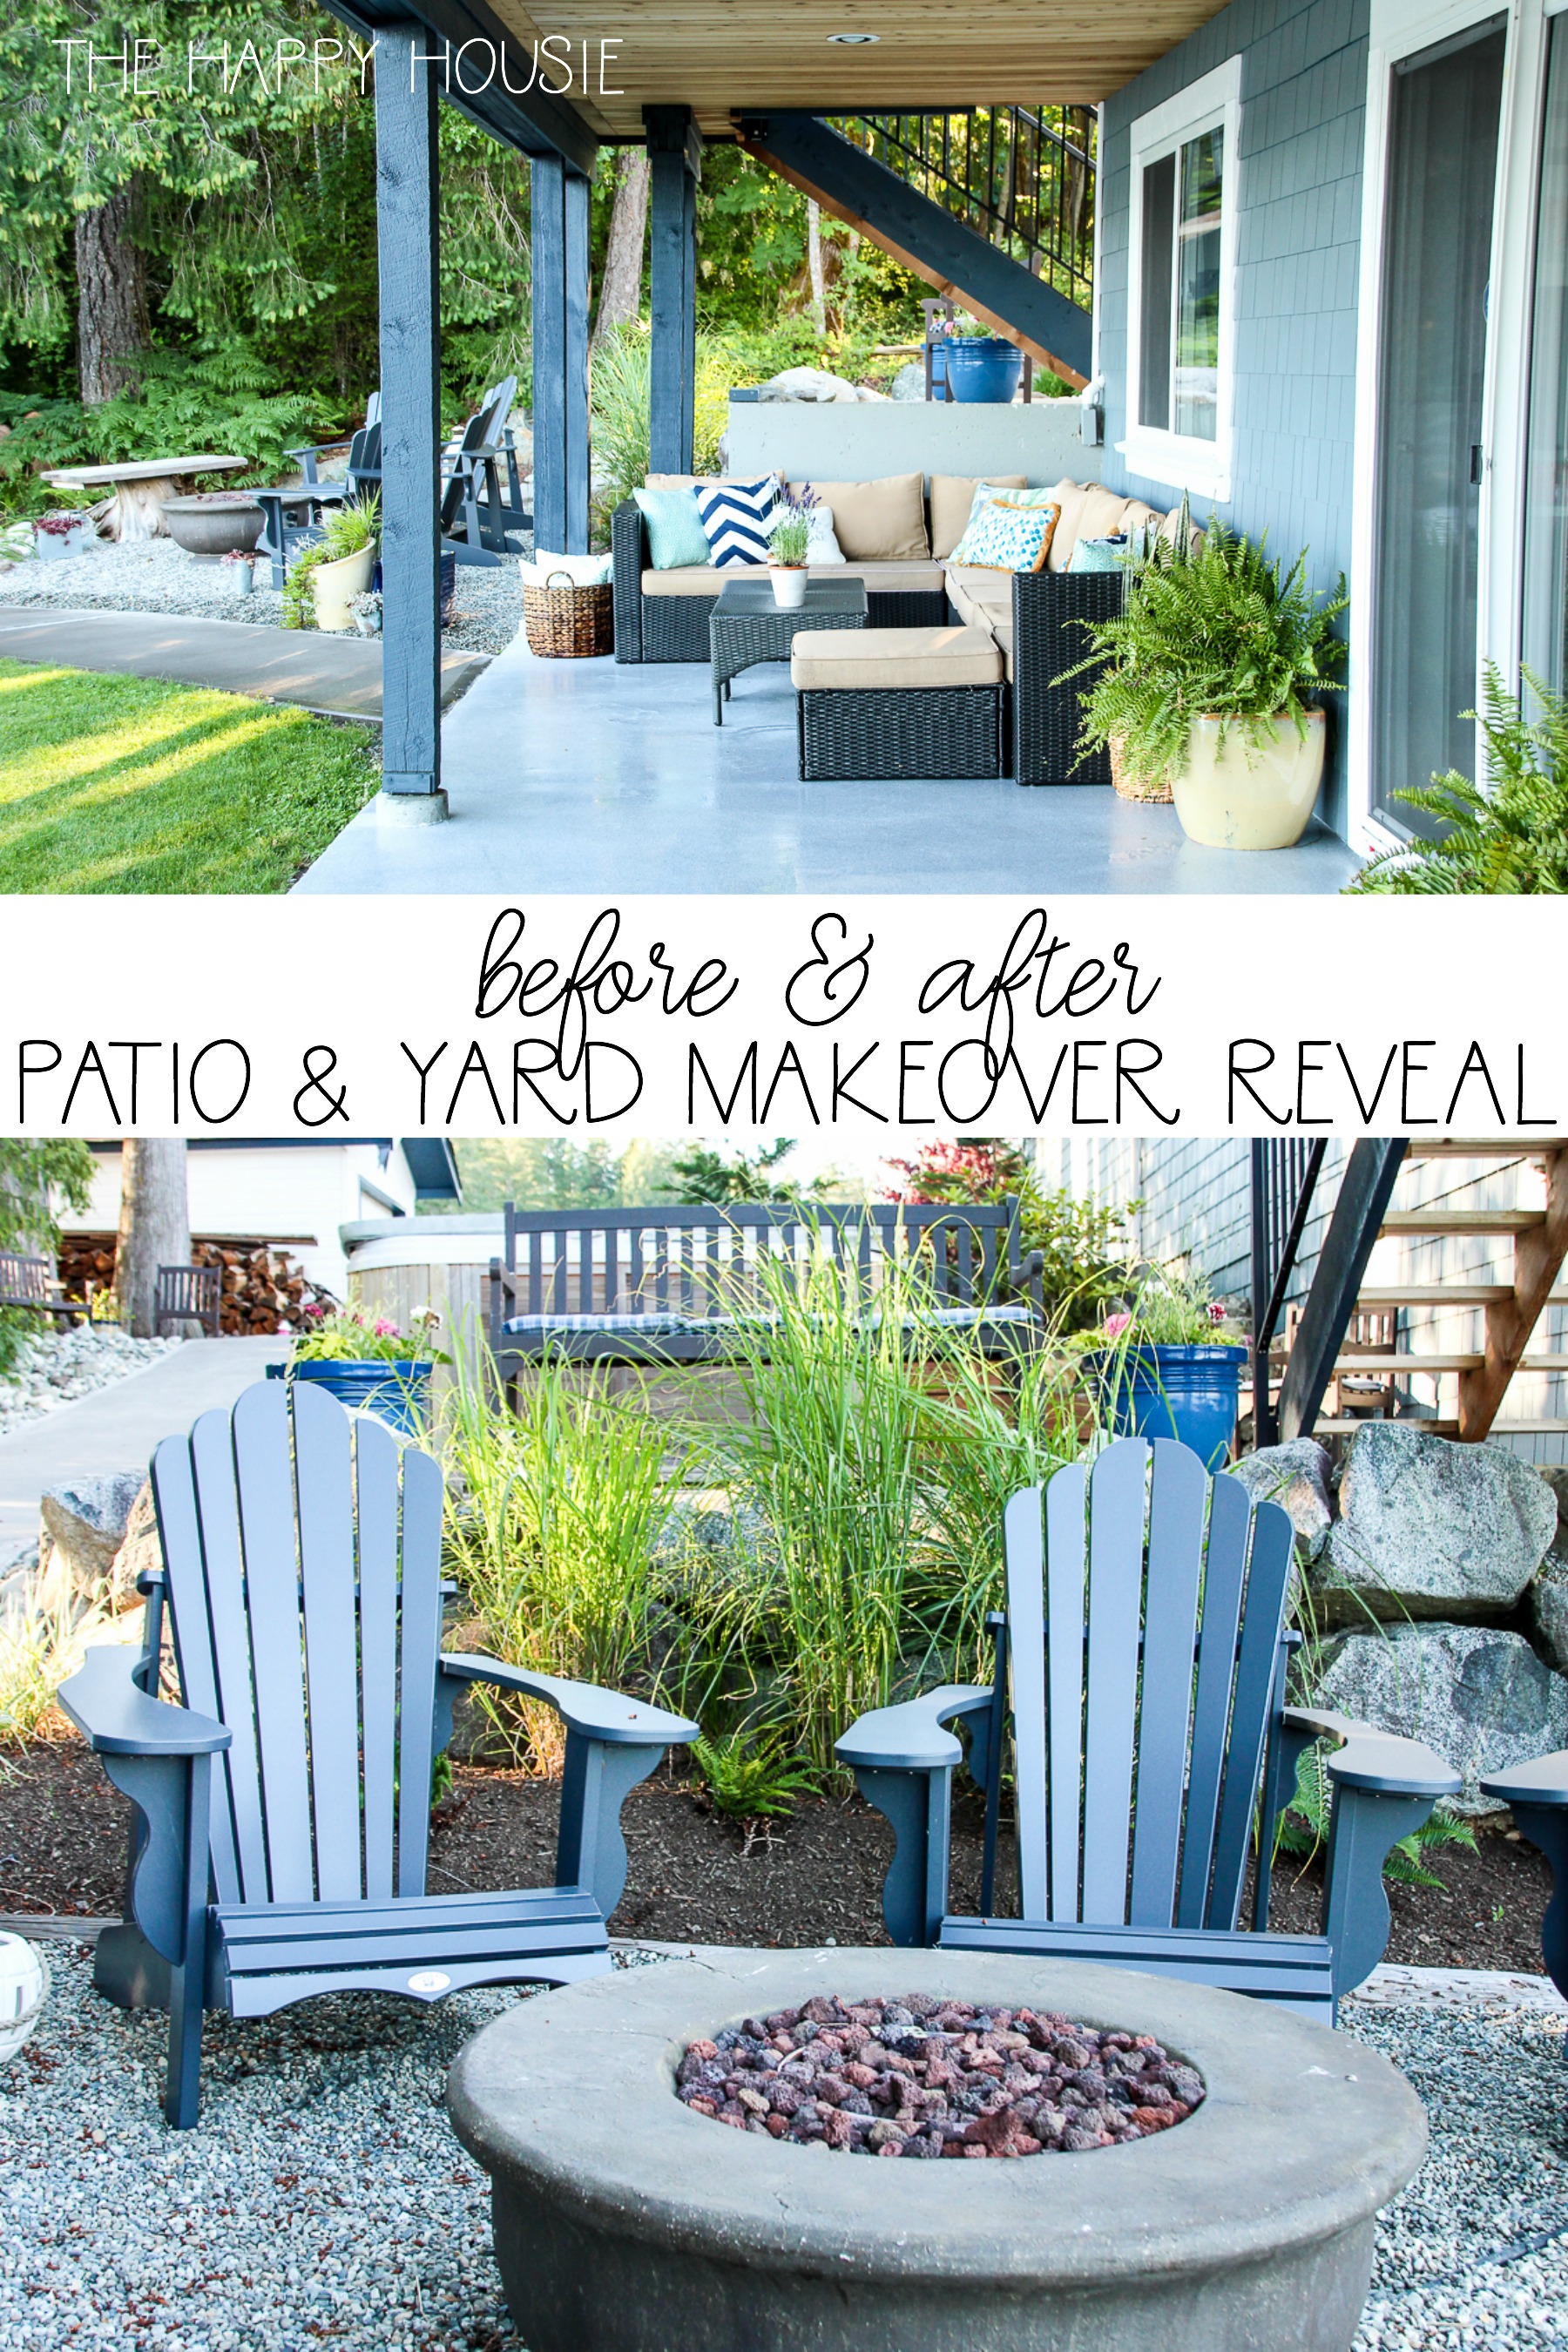 Before and after patio and yard makeover reveal poster.